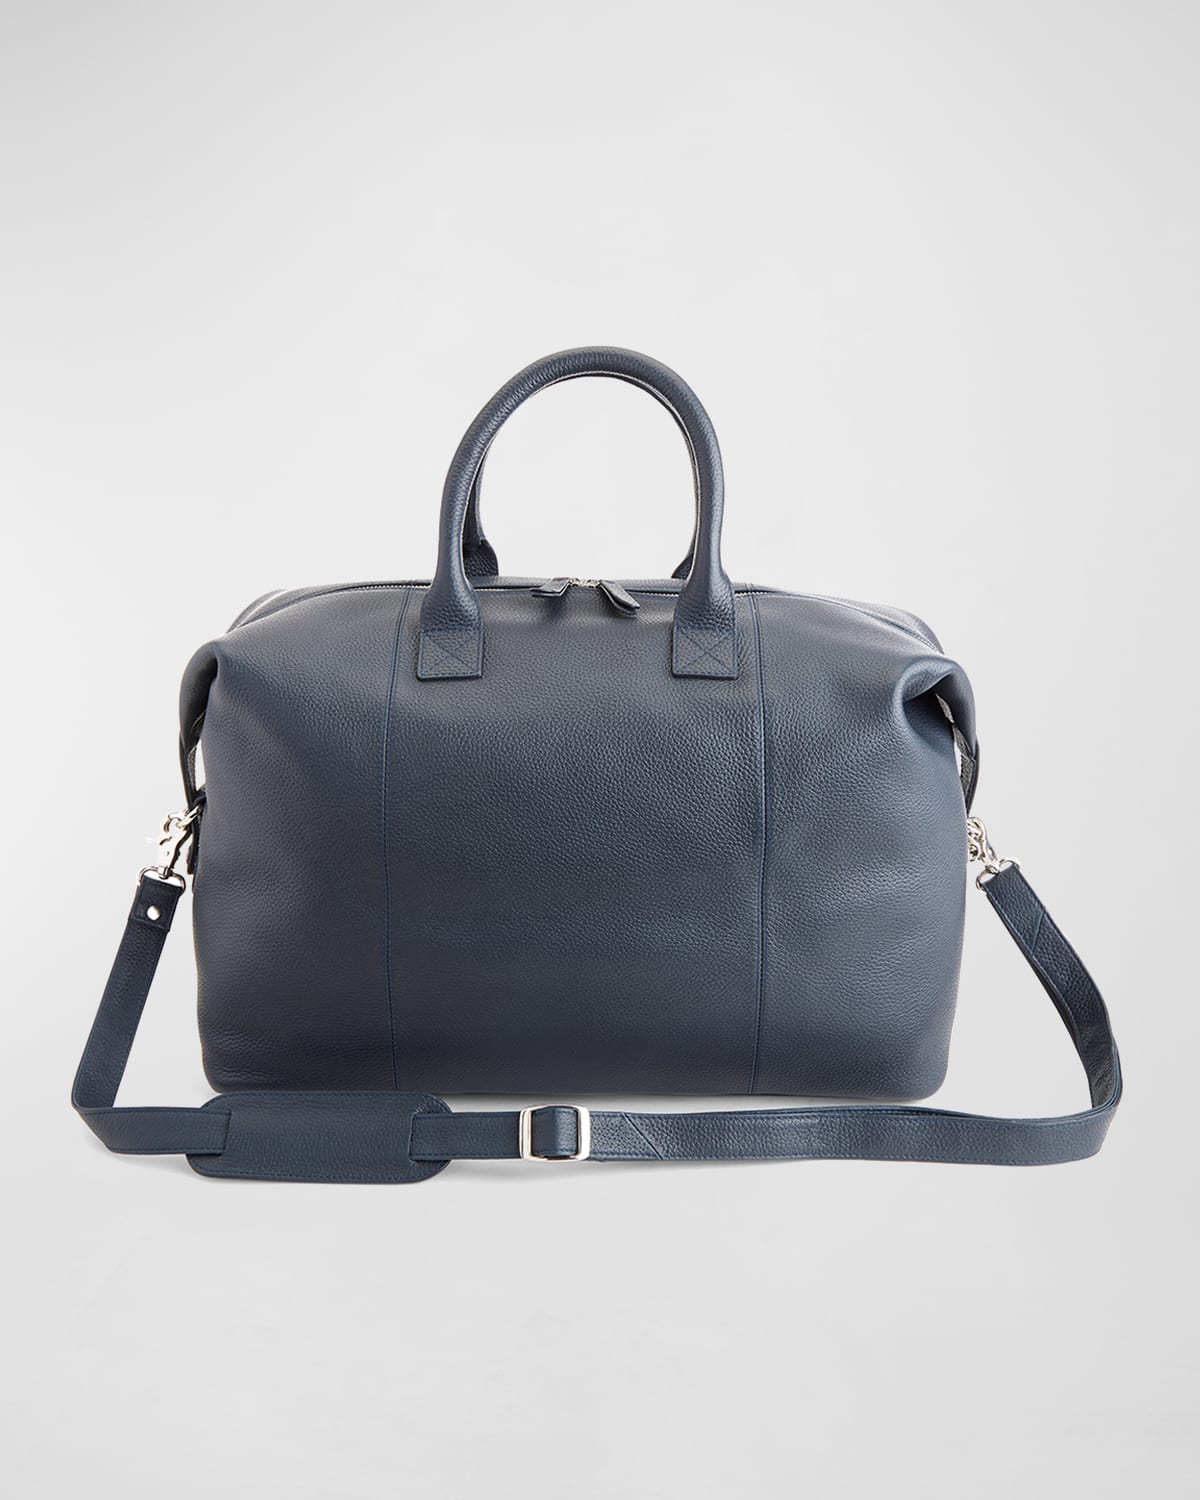 Royce New York Personalized Medium Executive Leather Duffel Bag In Navy Blue